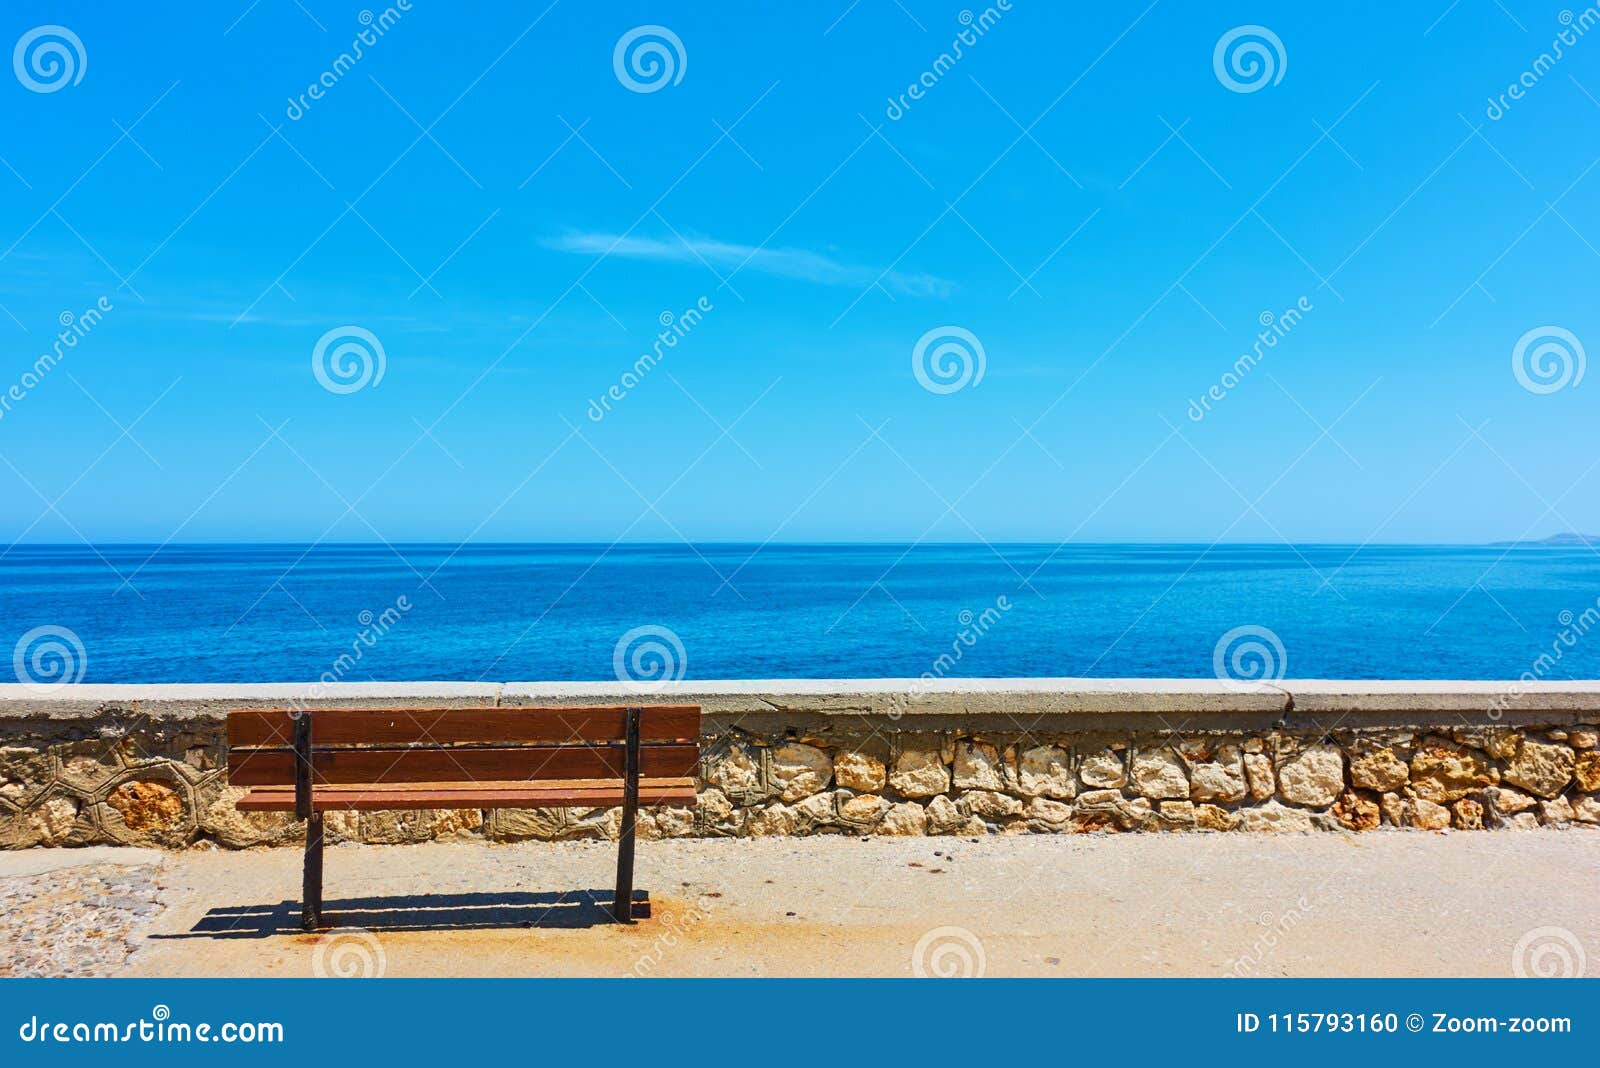 lonely bench near blue sea